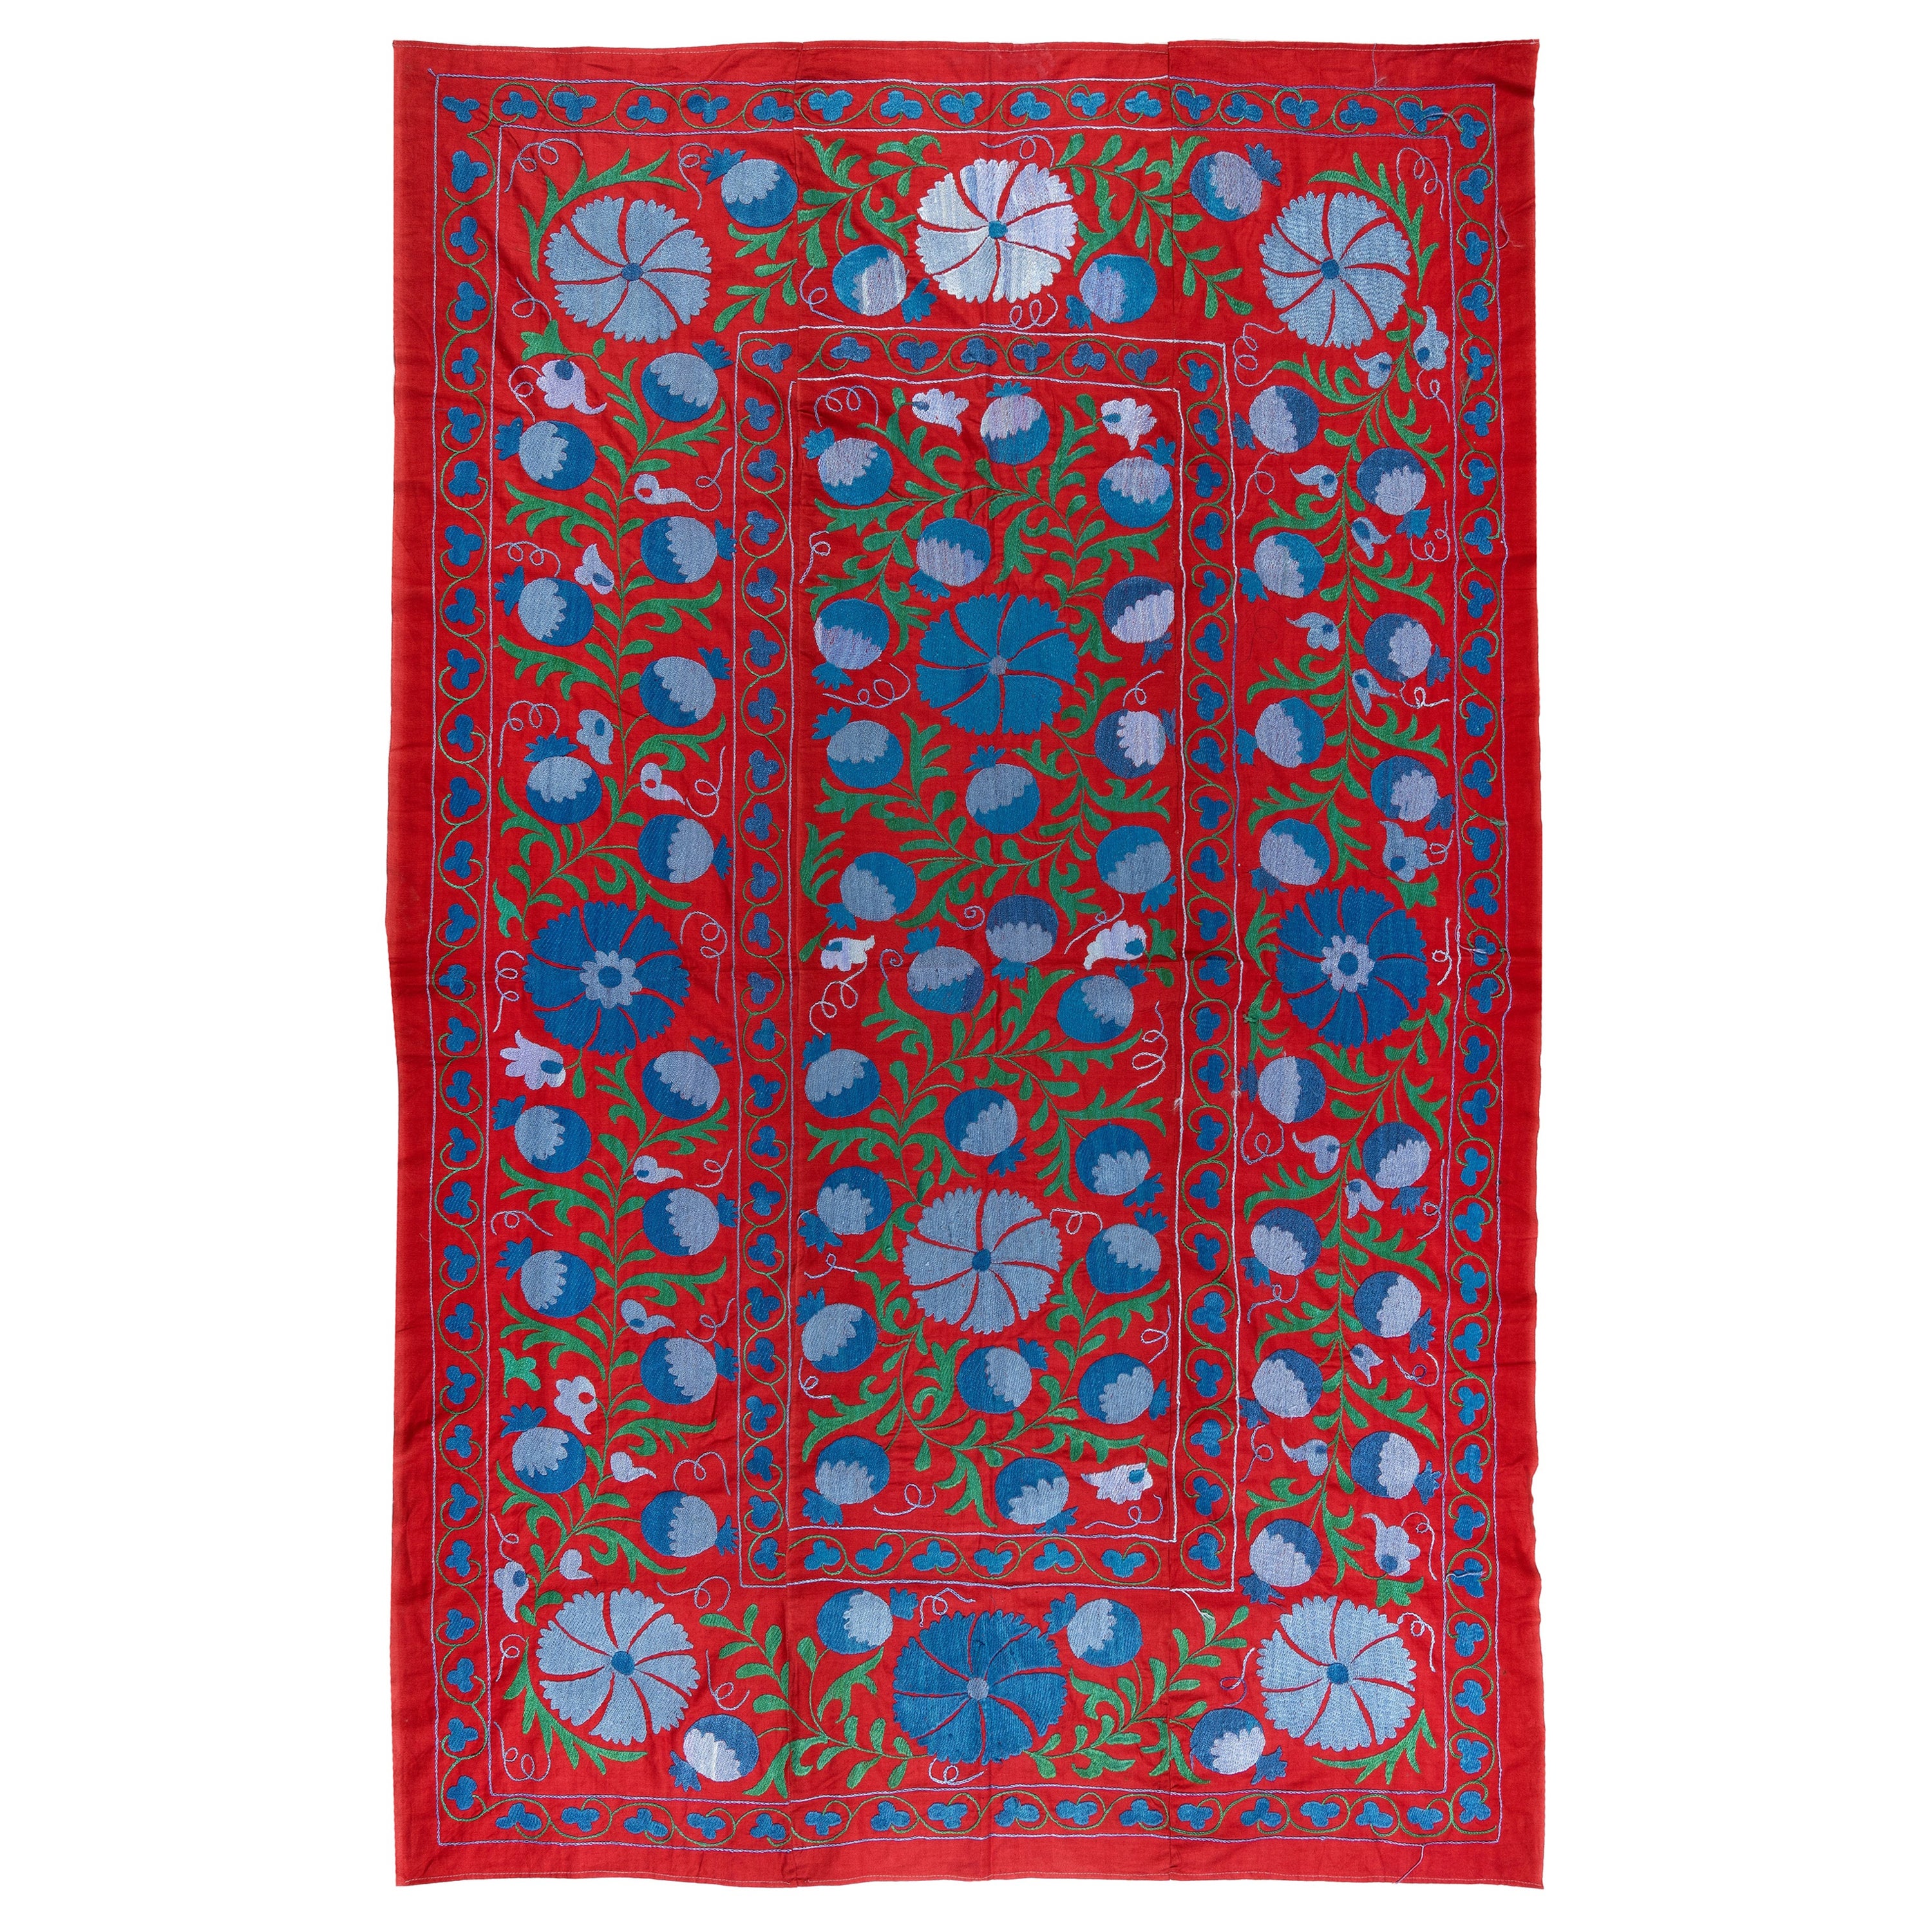 4.5x7 Ft Magnificent Silk Embroidery Suzani Wall Hanging in Red, Blue and Green